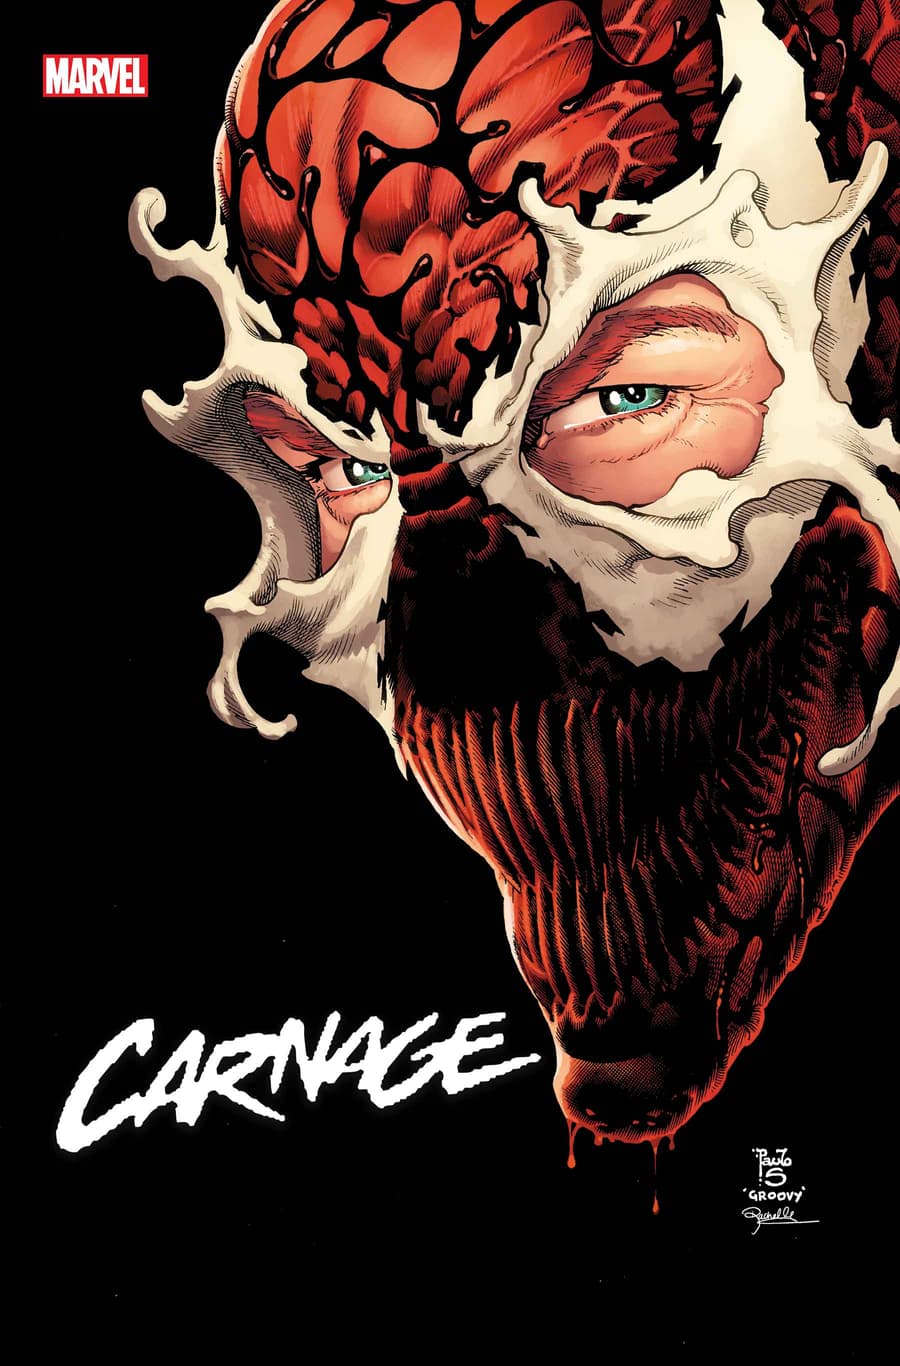 CARNAGE #1 cover by Paulo Siquiera